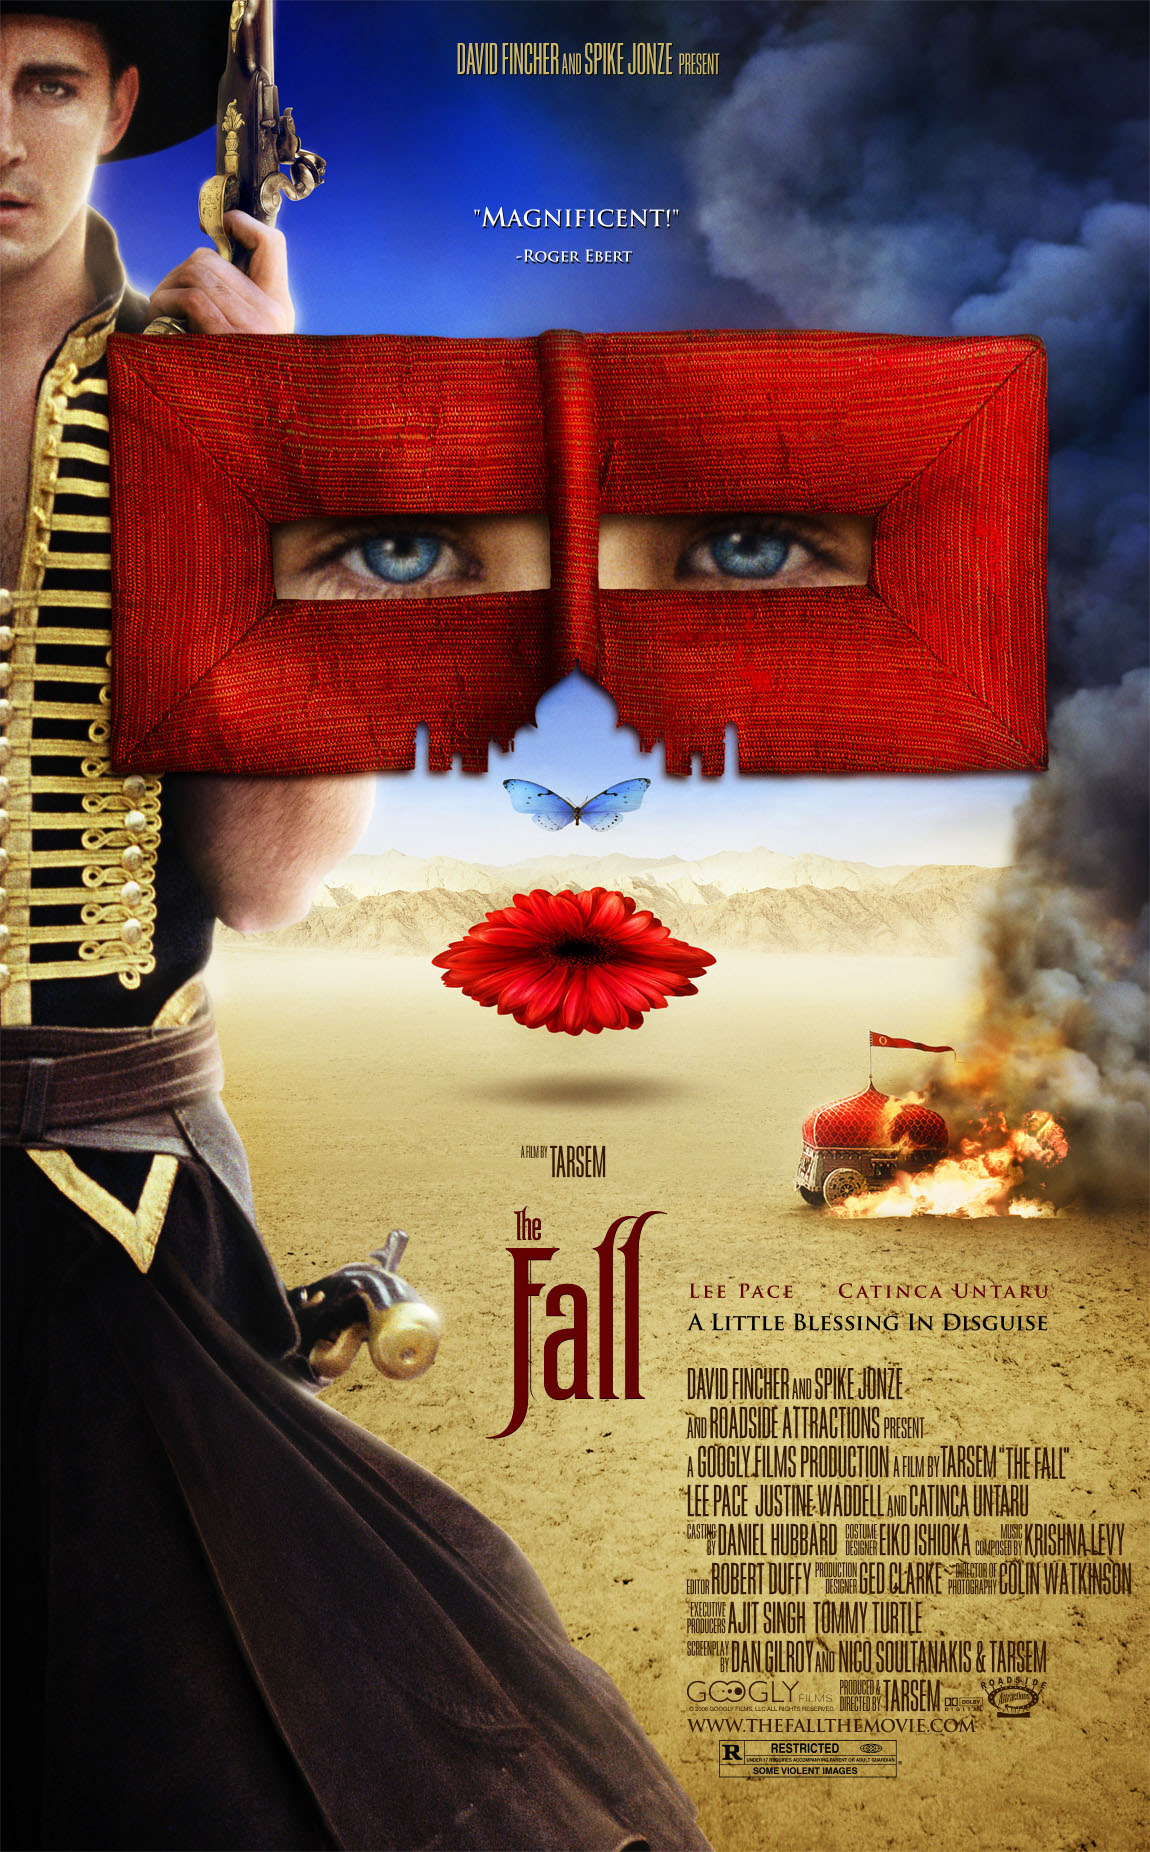 The Fall- Stunning Cinematography The Fall Movie The Fall 2006 Fantasy Movies